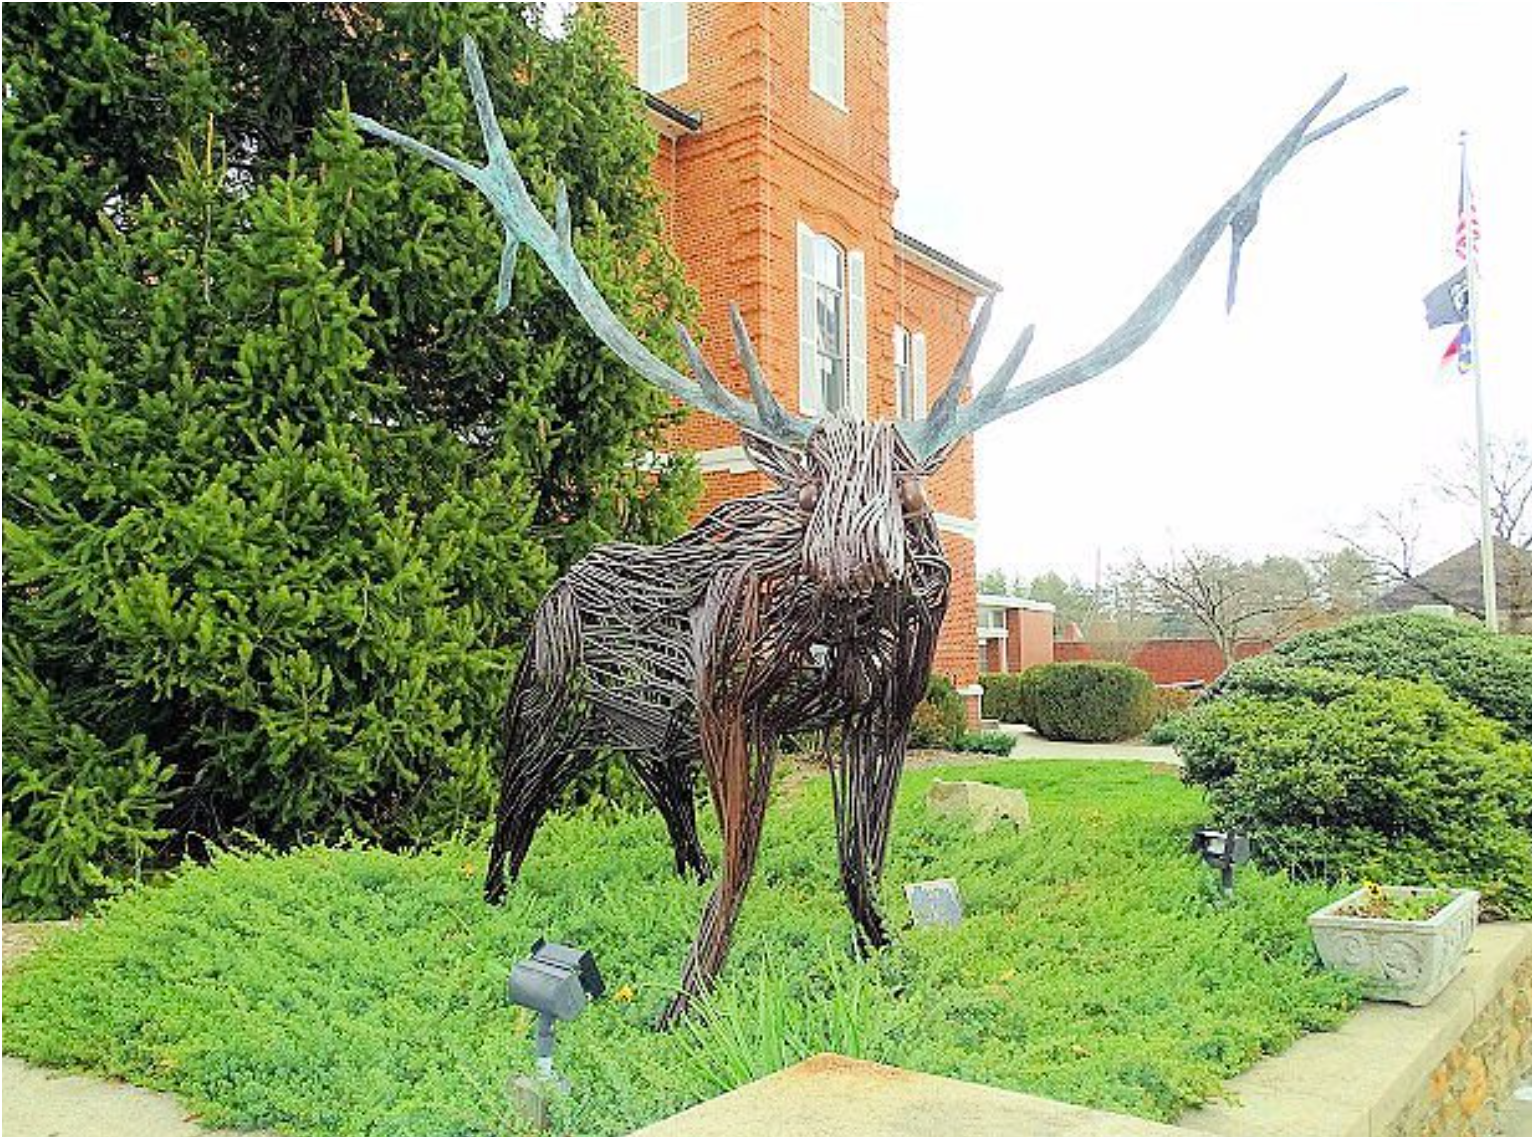 a statue of a deer with antlers is in front of a brick building